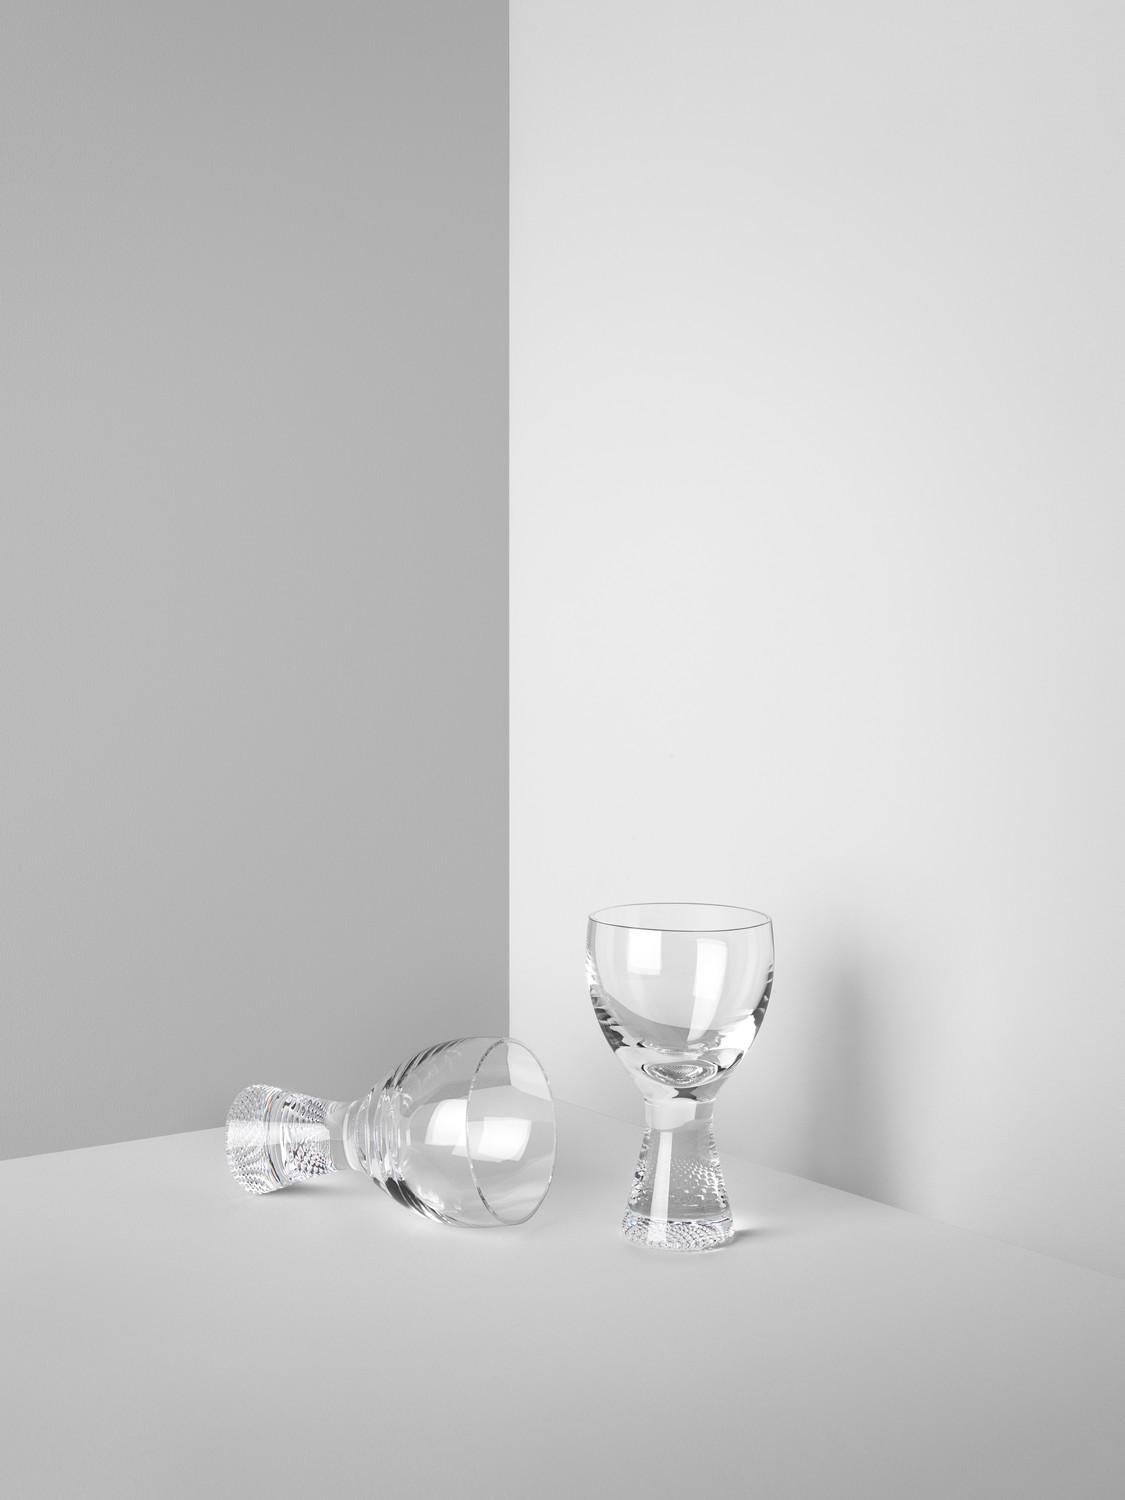 Like all the items in the Limelight collection, this glass has the distinctive, textured base that optically reflects light. The small wine glass is great for white wines, and it's even handmade. All the pieces in the collection from Kosta Boda are